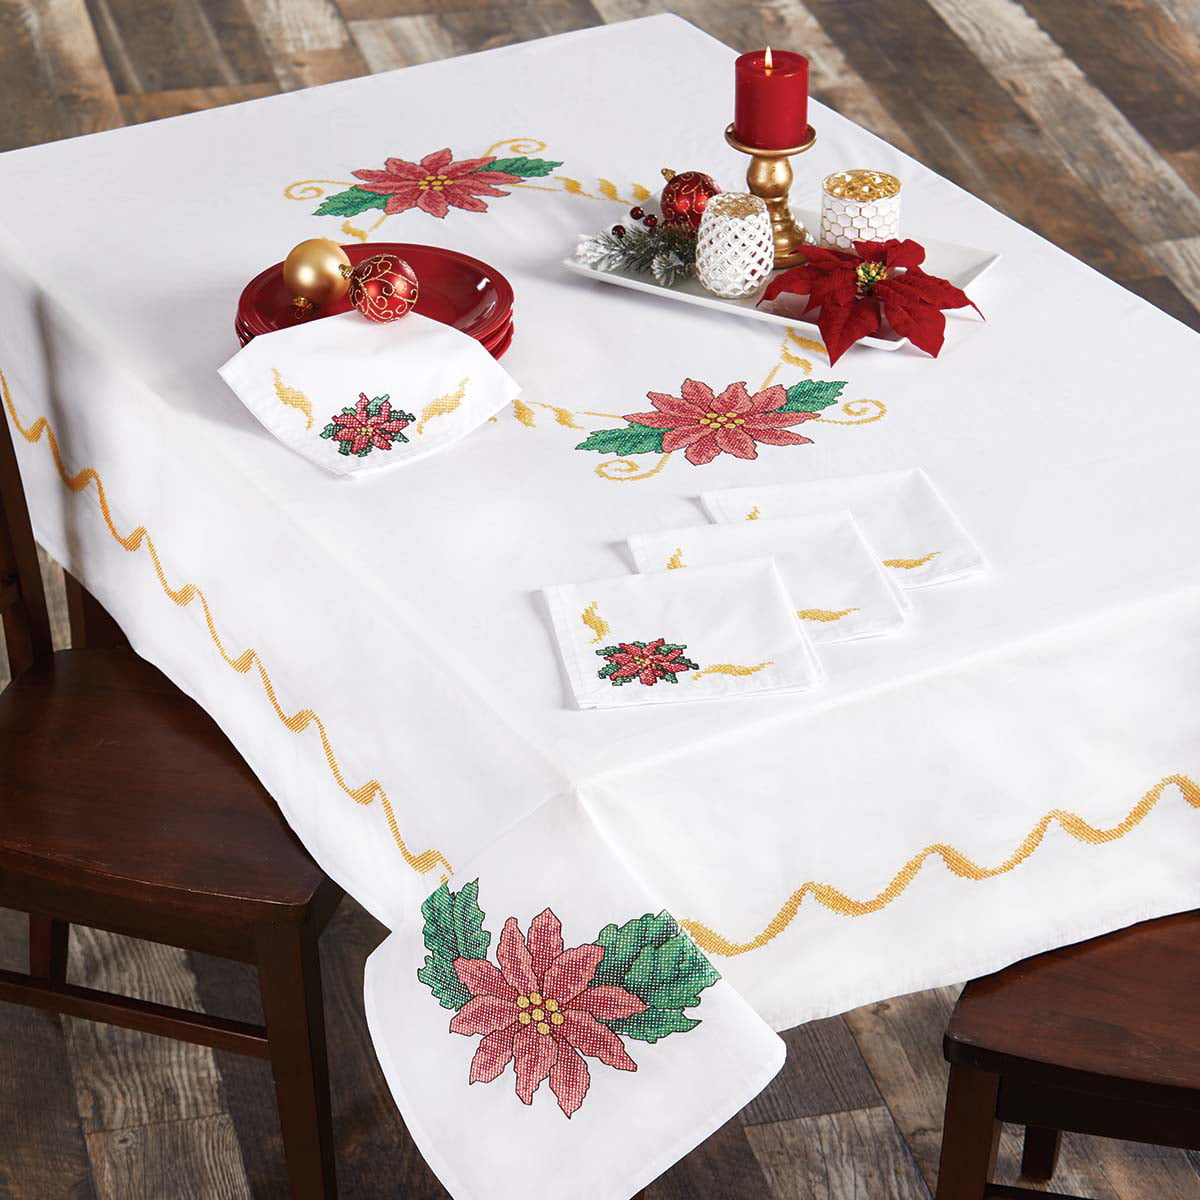 Vintage Poinsettia hand cross stitched table runner